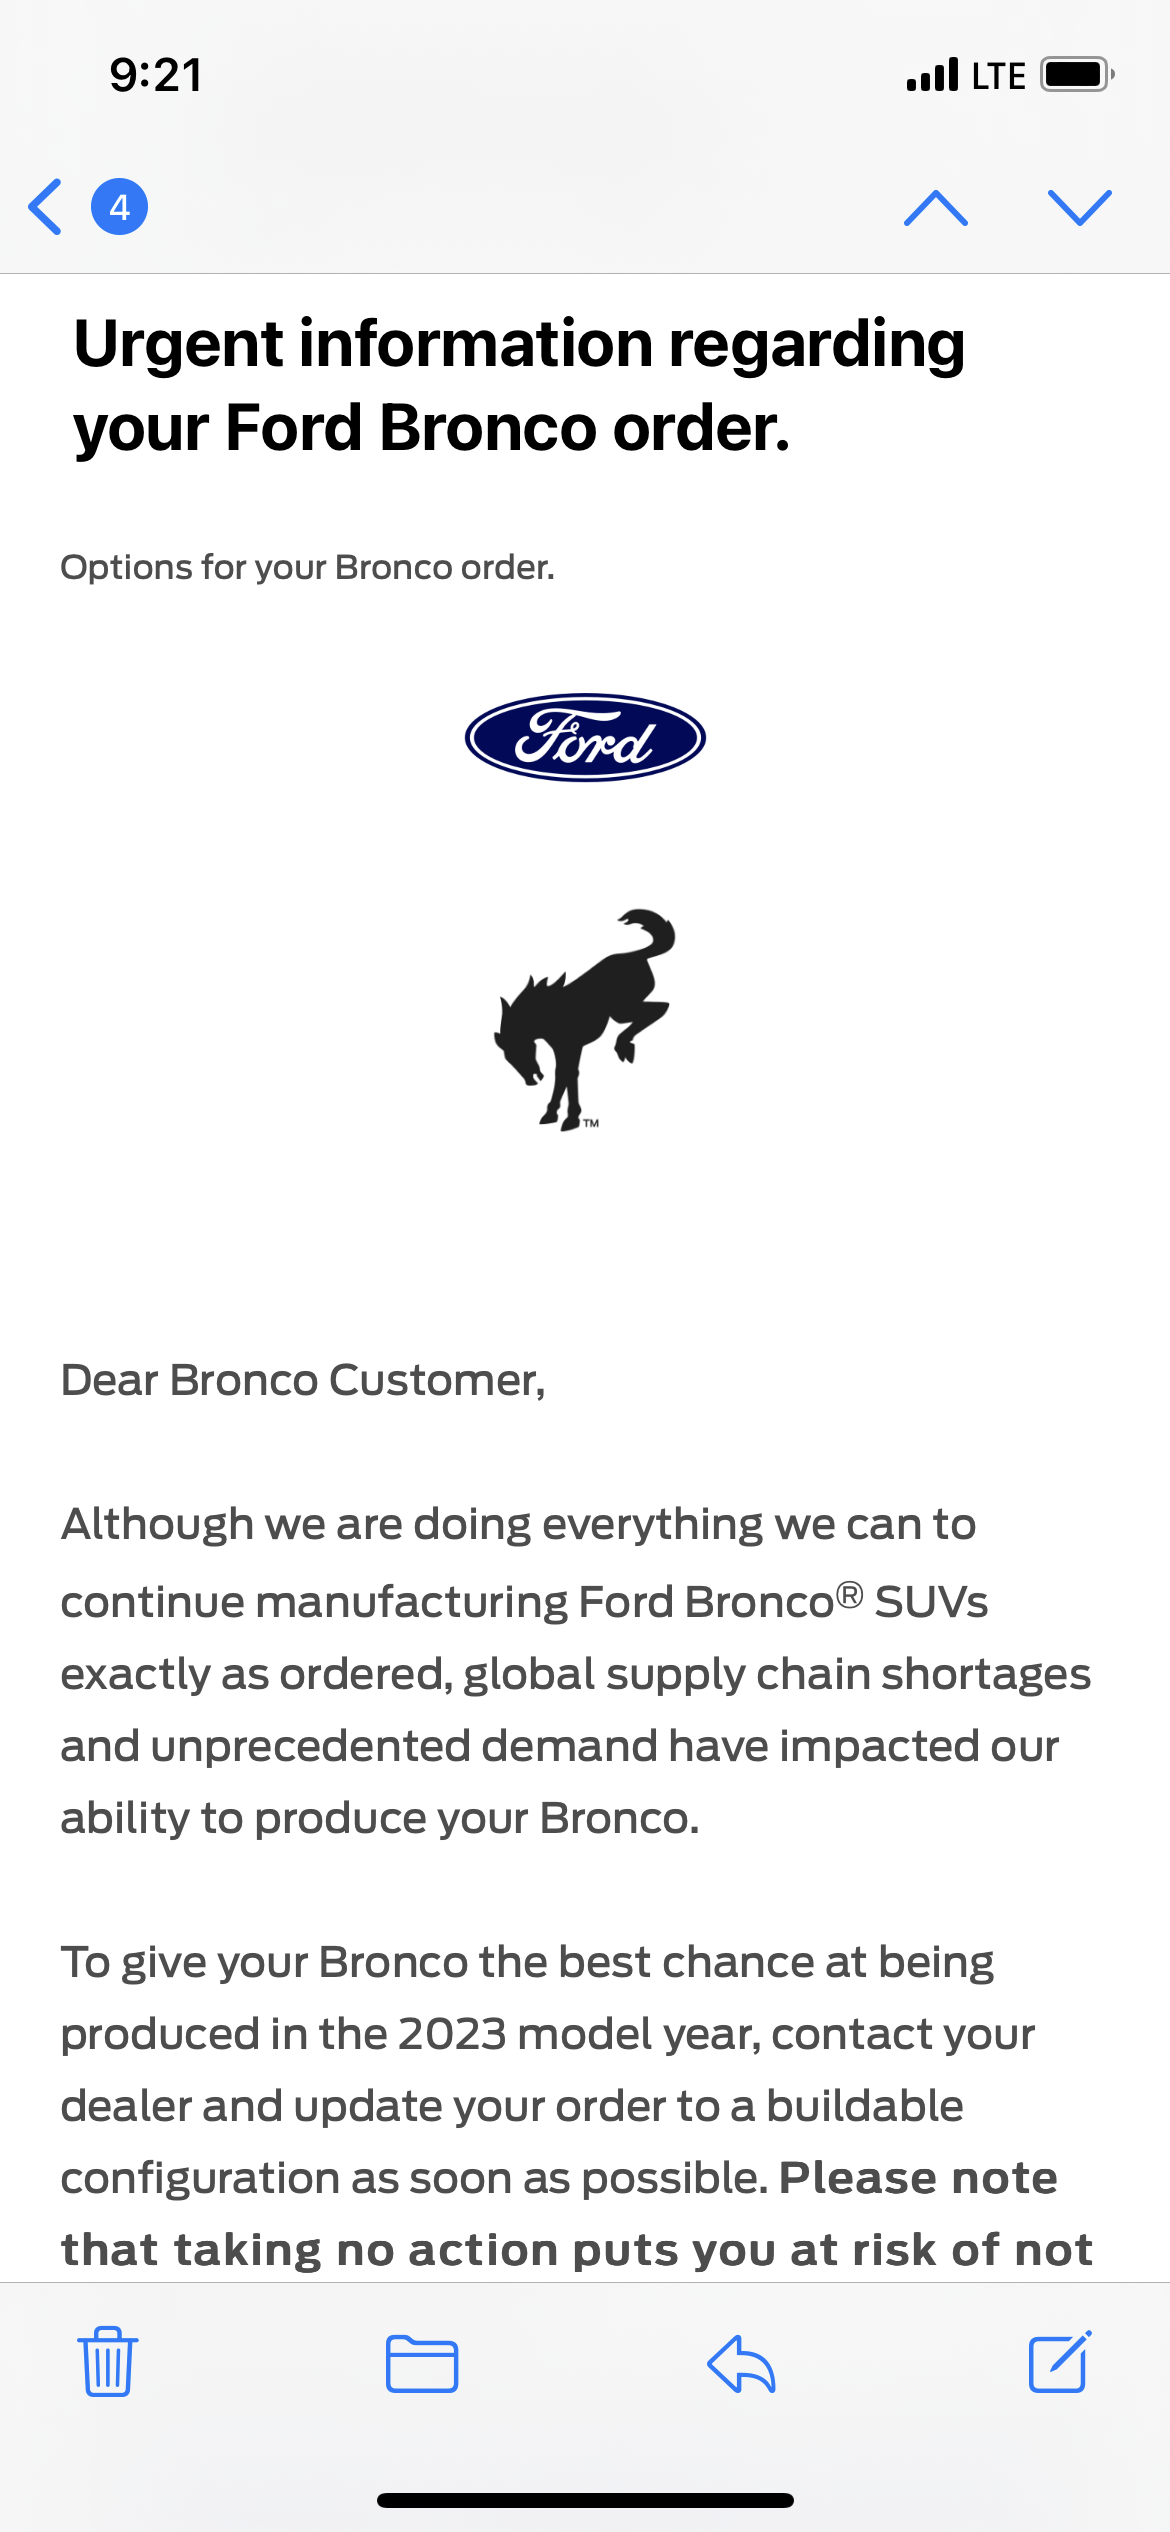 Ford Bronco 📧 Bad news Friday... official email from Ford: "Urgent information regarding your Ford Bronco order." 1C849827-785F-4D18-9D84-278C6187B4ED